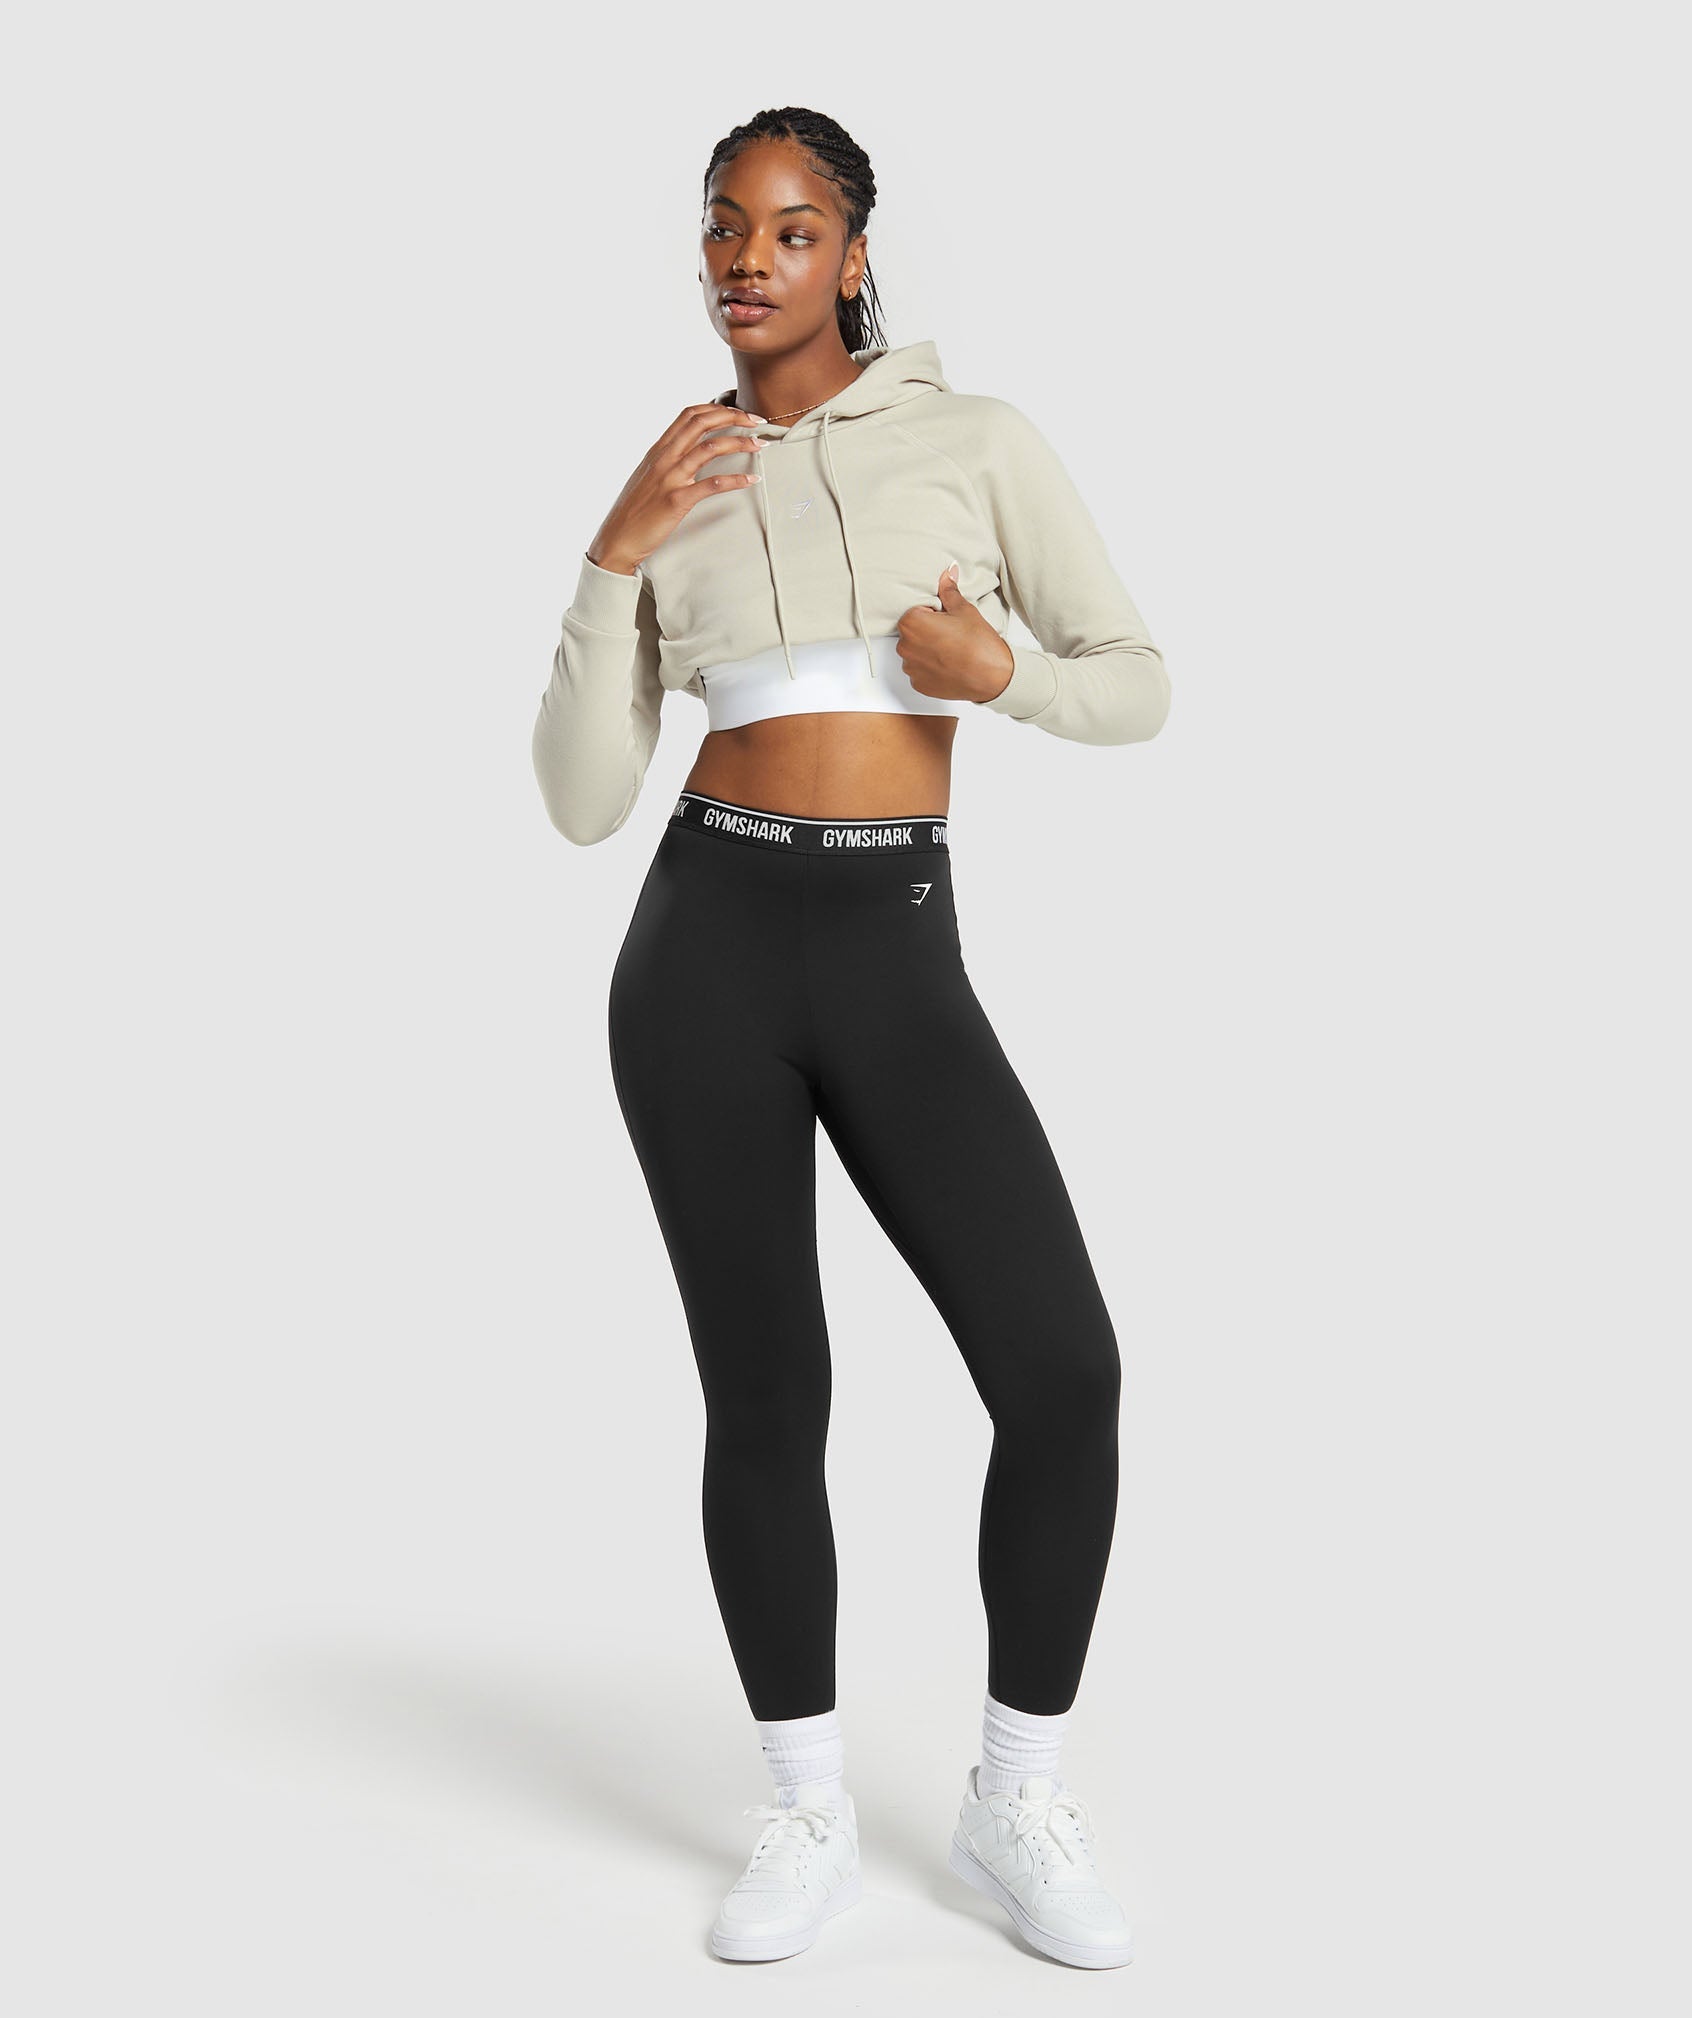 Gym Pullovers for Women - Gymshark